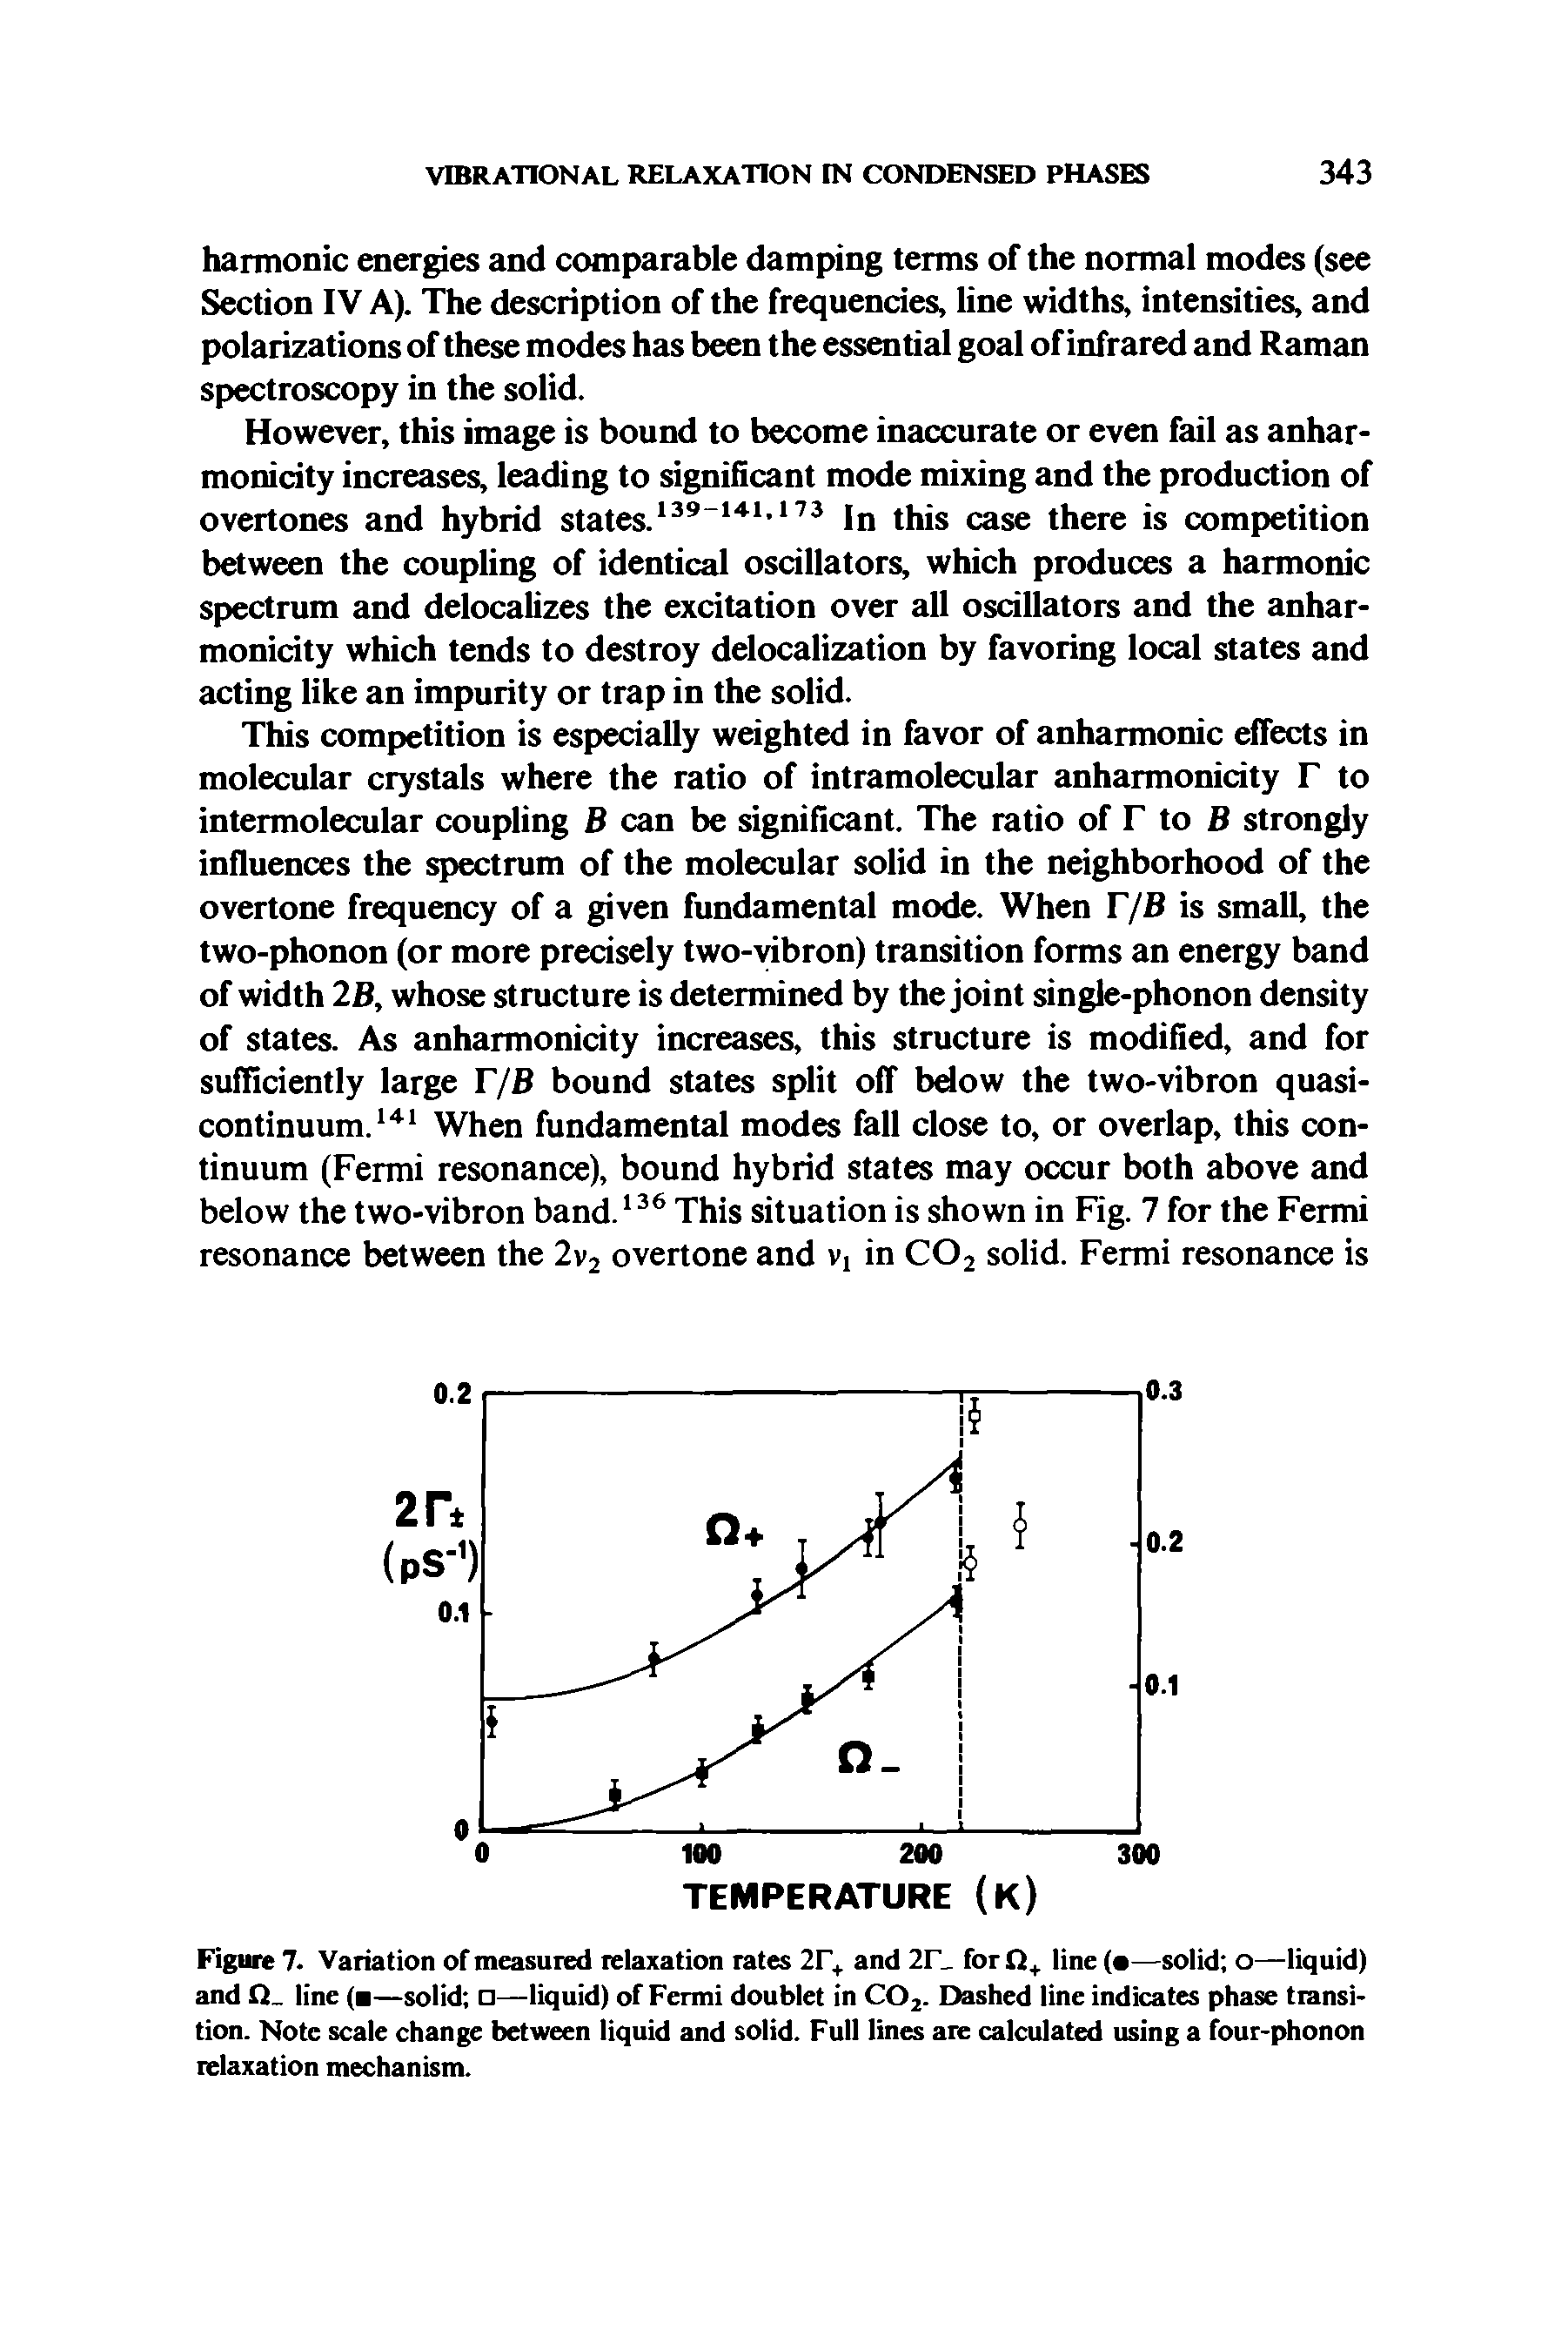 Figure 7. Variation of measured relaxation rates 2F+ and 2F for D,. line ( —solid o—liquid) and n line ( —solid —liquid) of Fermi doublet in CO2. Dashed line indicates phase transition. Note scale change between liquid and solid. Full lines are calculated using a four-phonon relaxation mechanism.